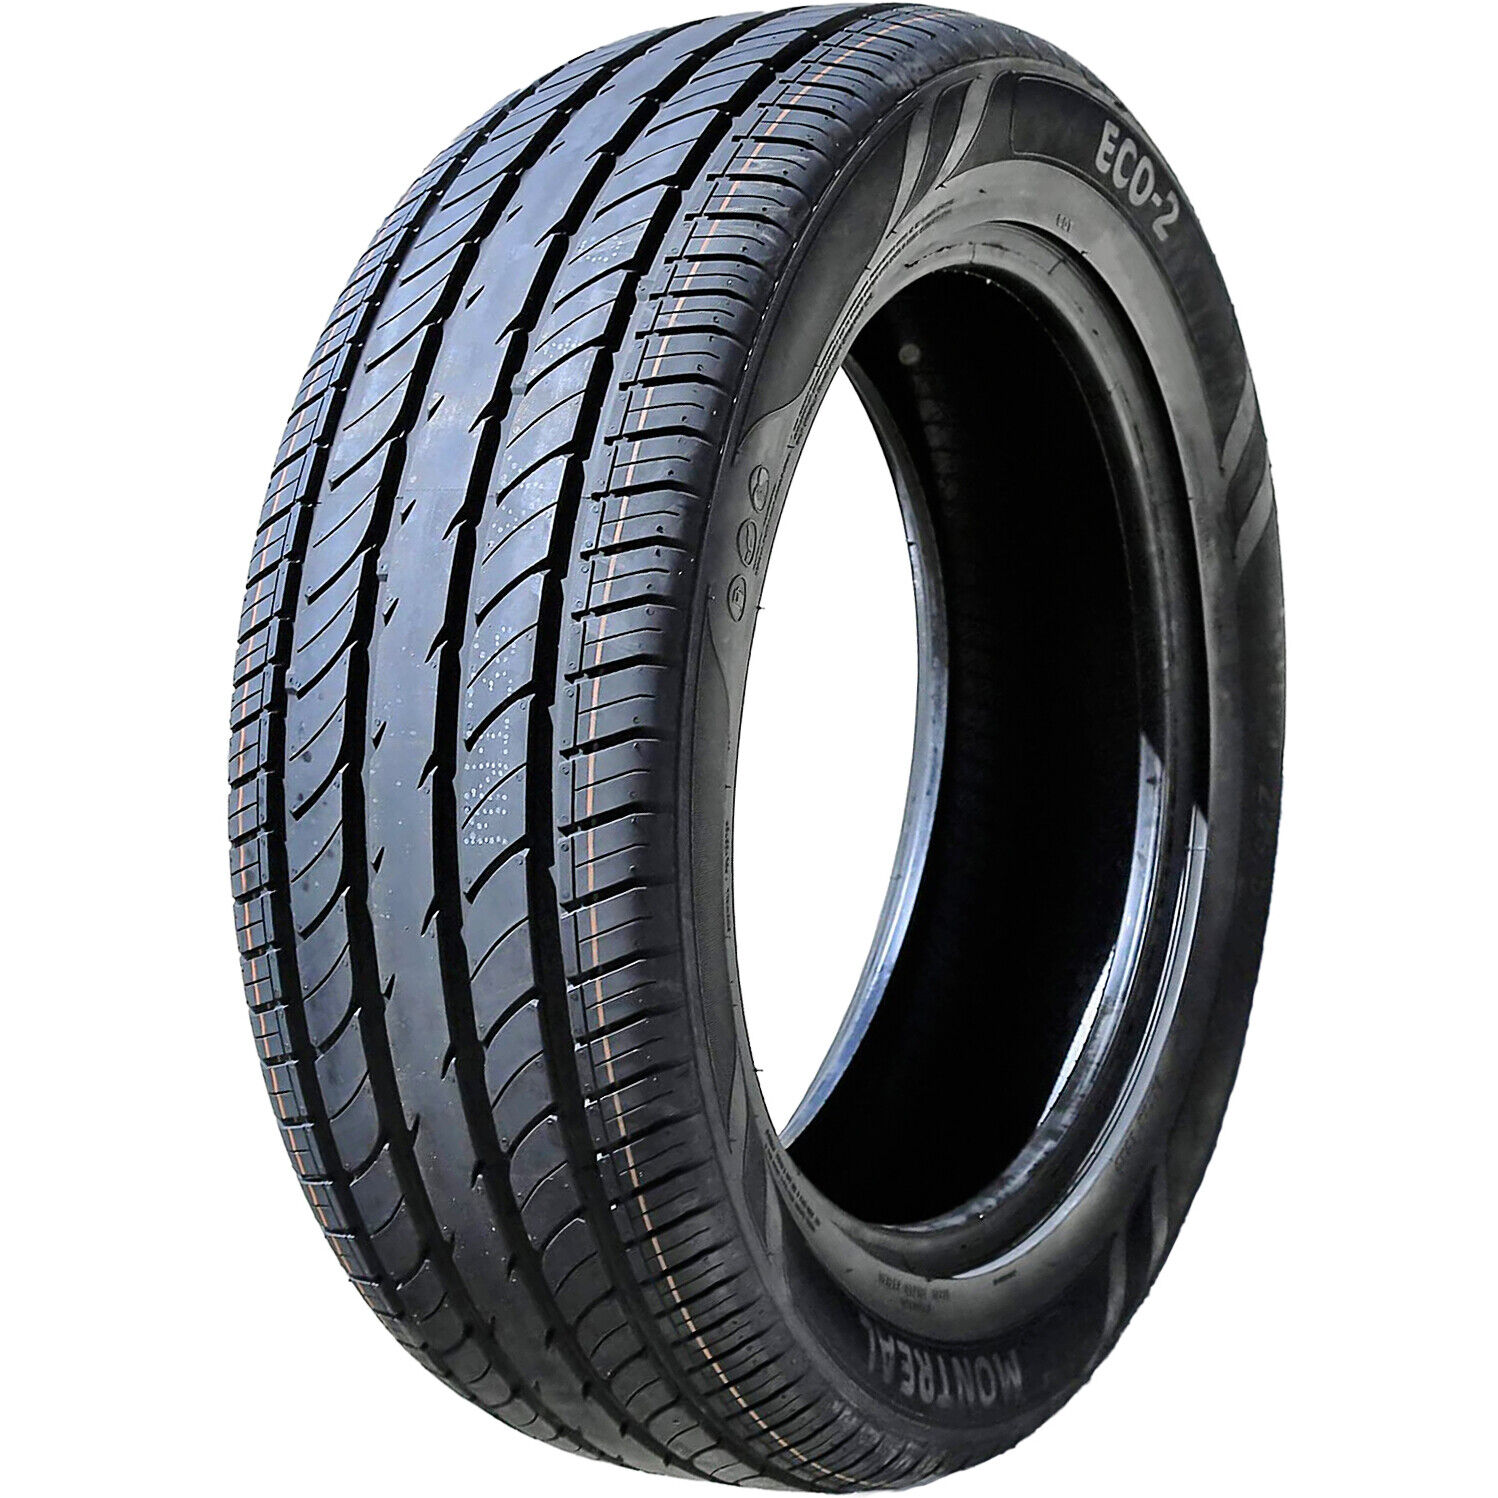 Tire Montreal Eco-2 205/45R17 88W XL AS A/S High Performance